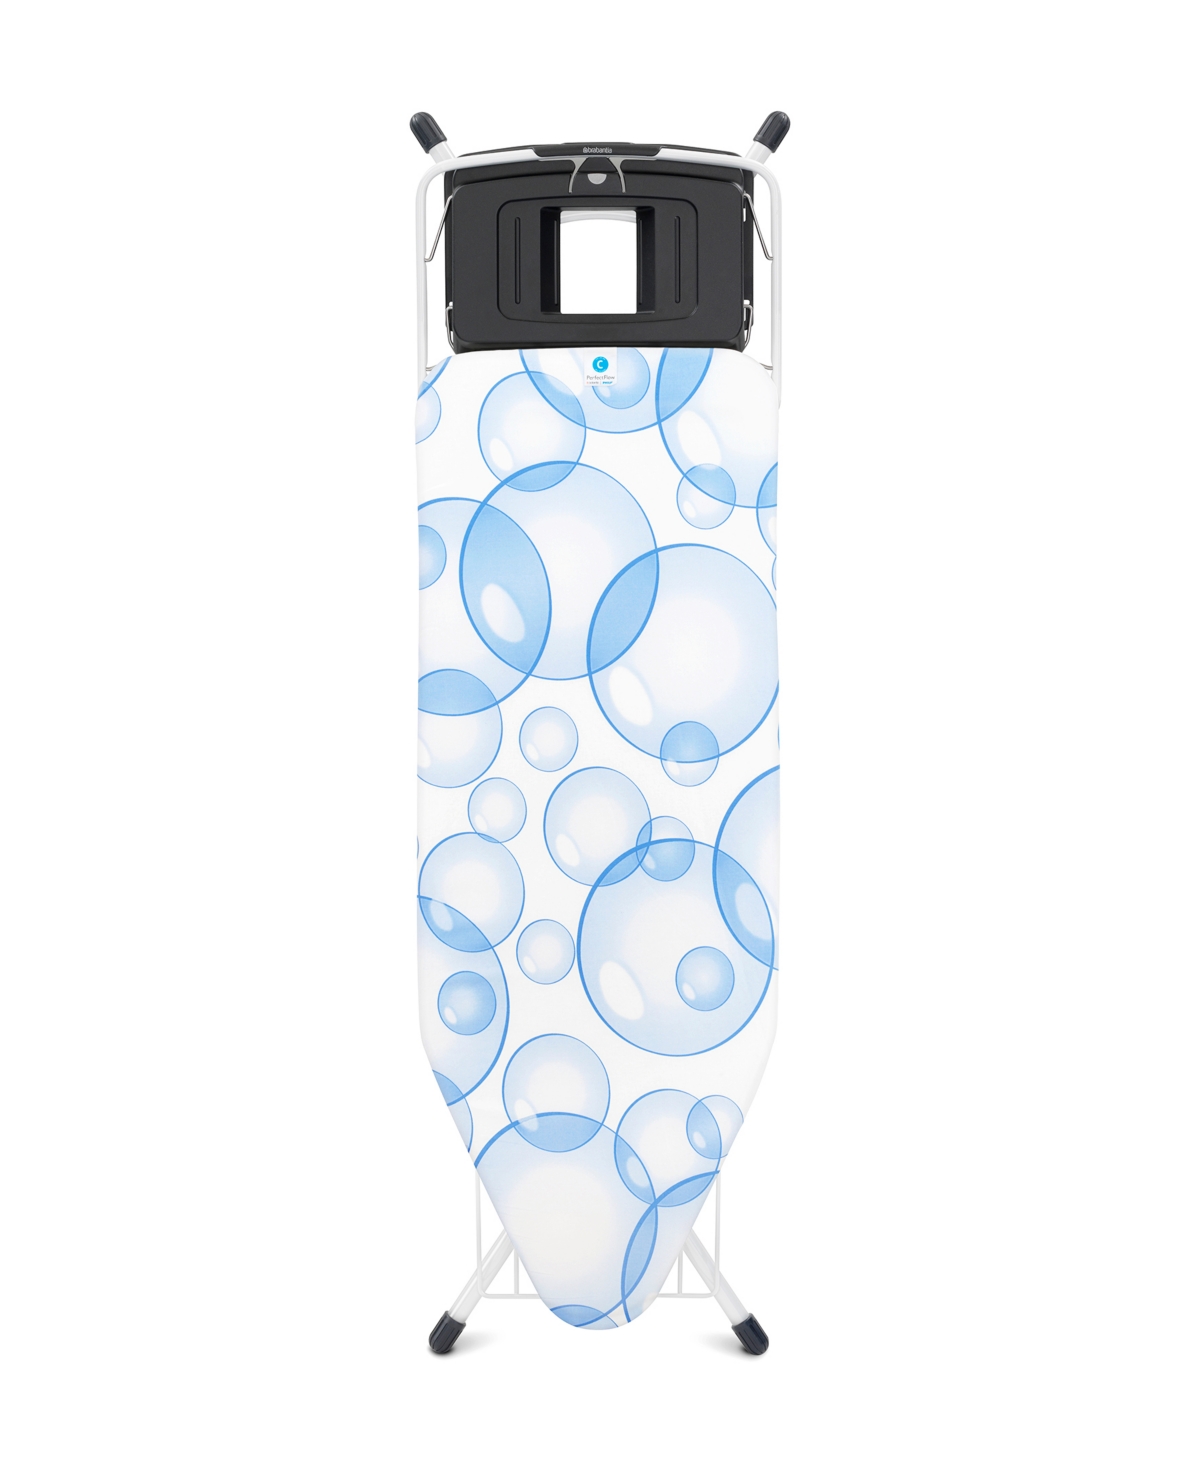 Ironing Board with Foldable Steam Unit Holder, Perfectflow Cover and bonus Foldable Linen Rack - Bubbles